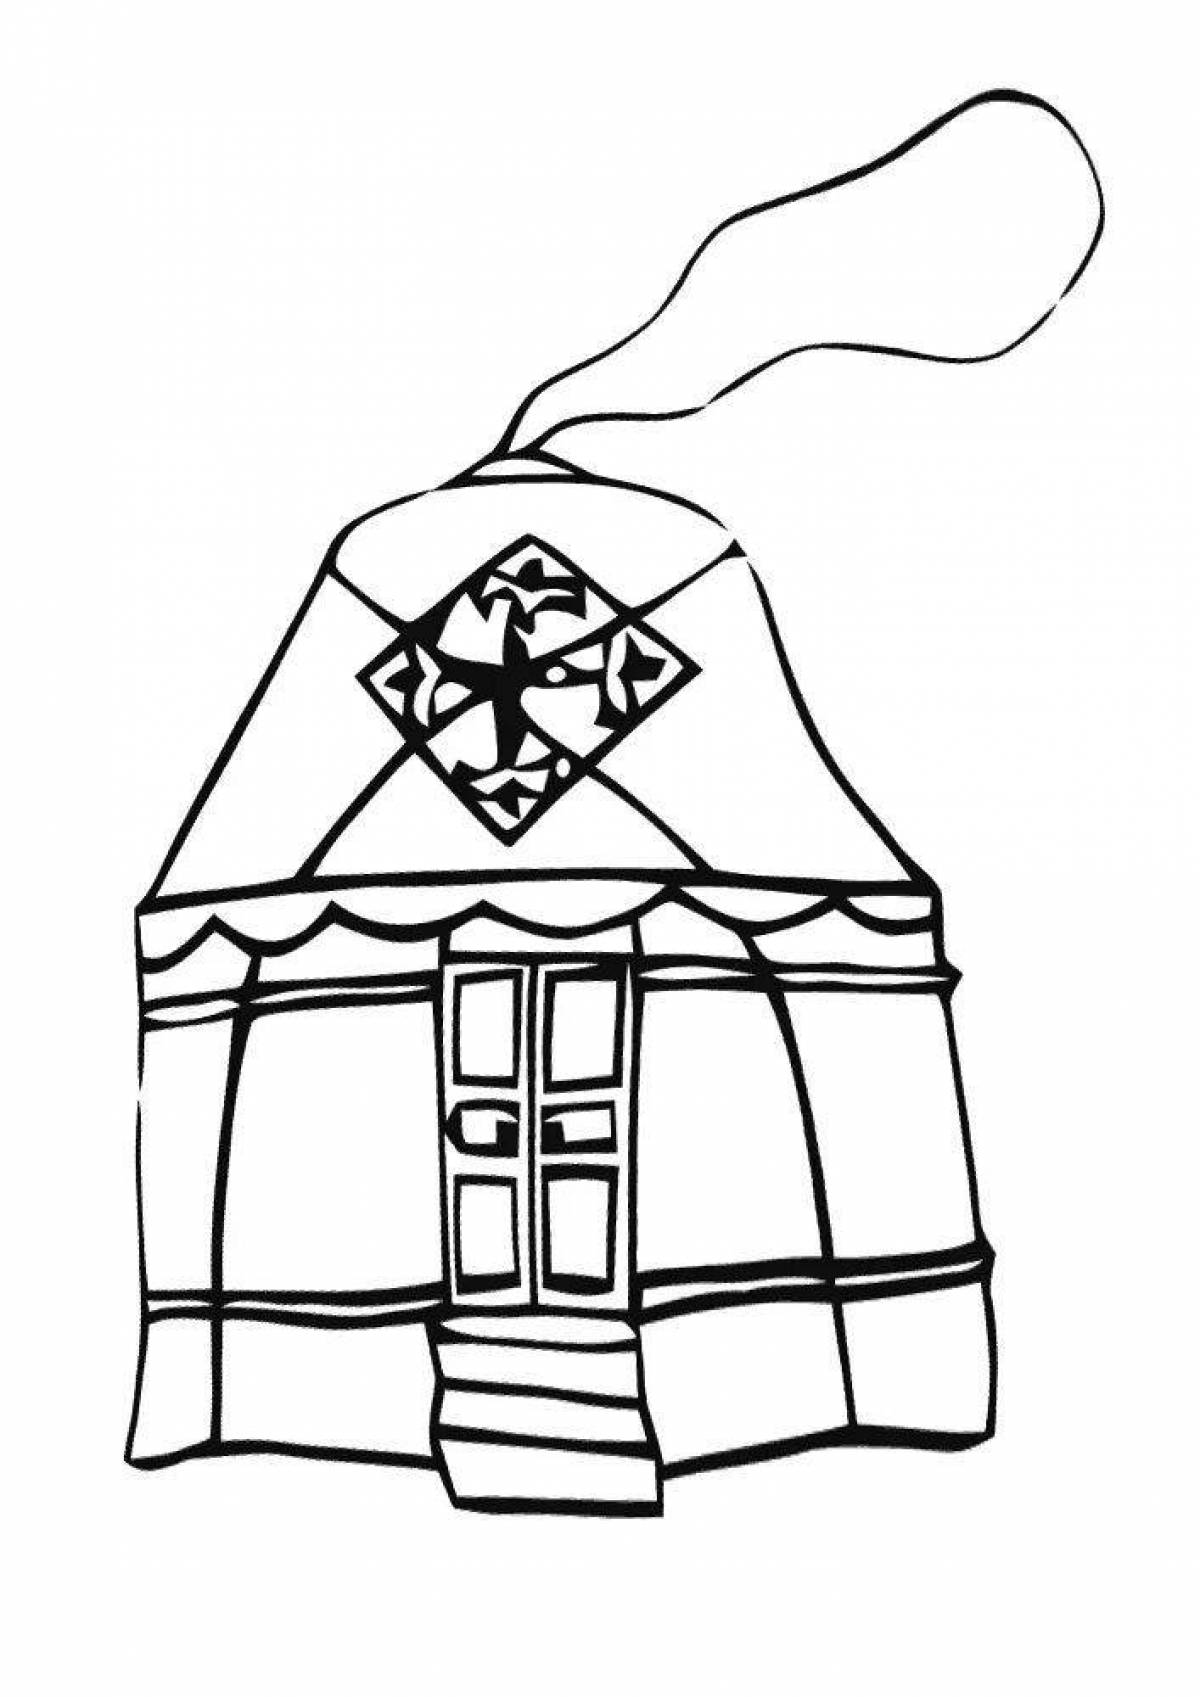 Majestic yurt coloring page